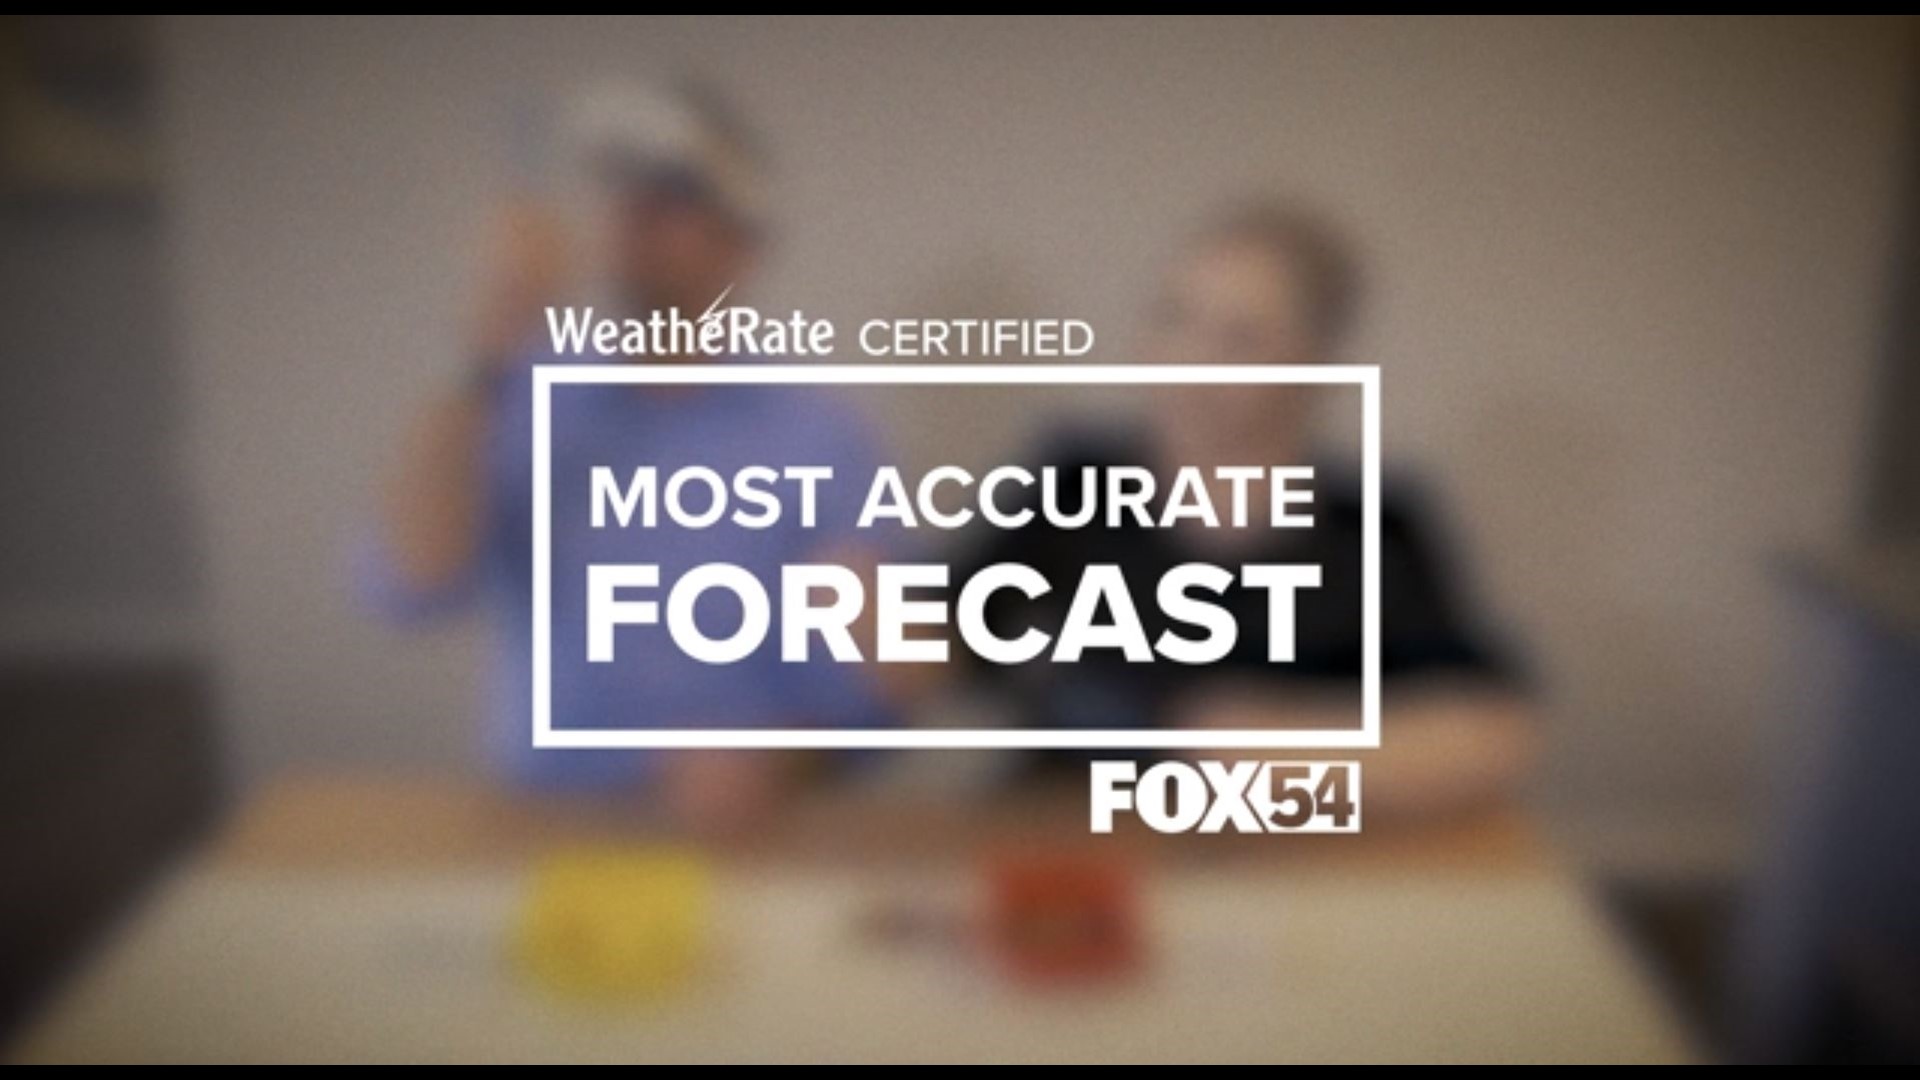 Your FOX54 Weather team is obsessed with accuracy. That's why they have the WeatheRate certified Most Accurate Forecast.